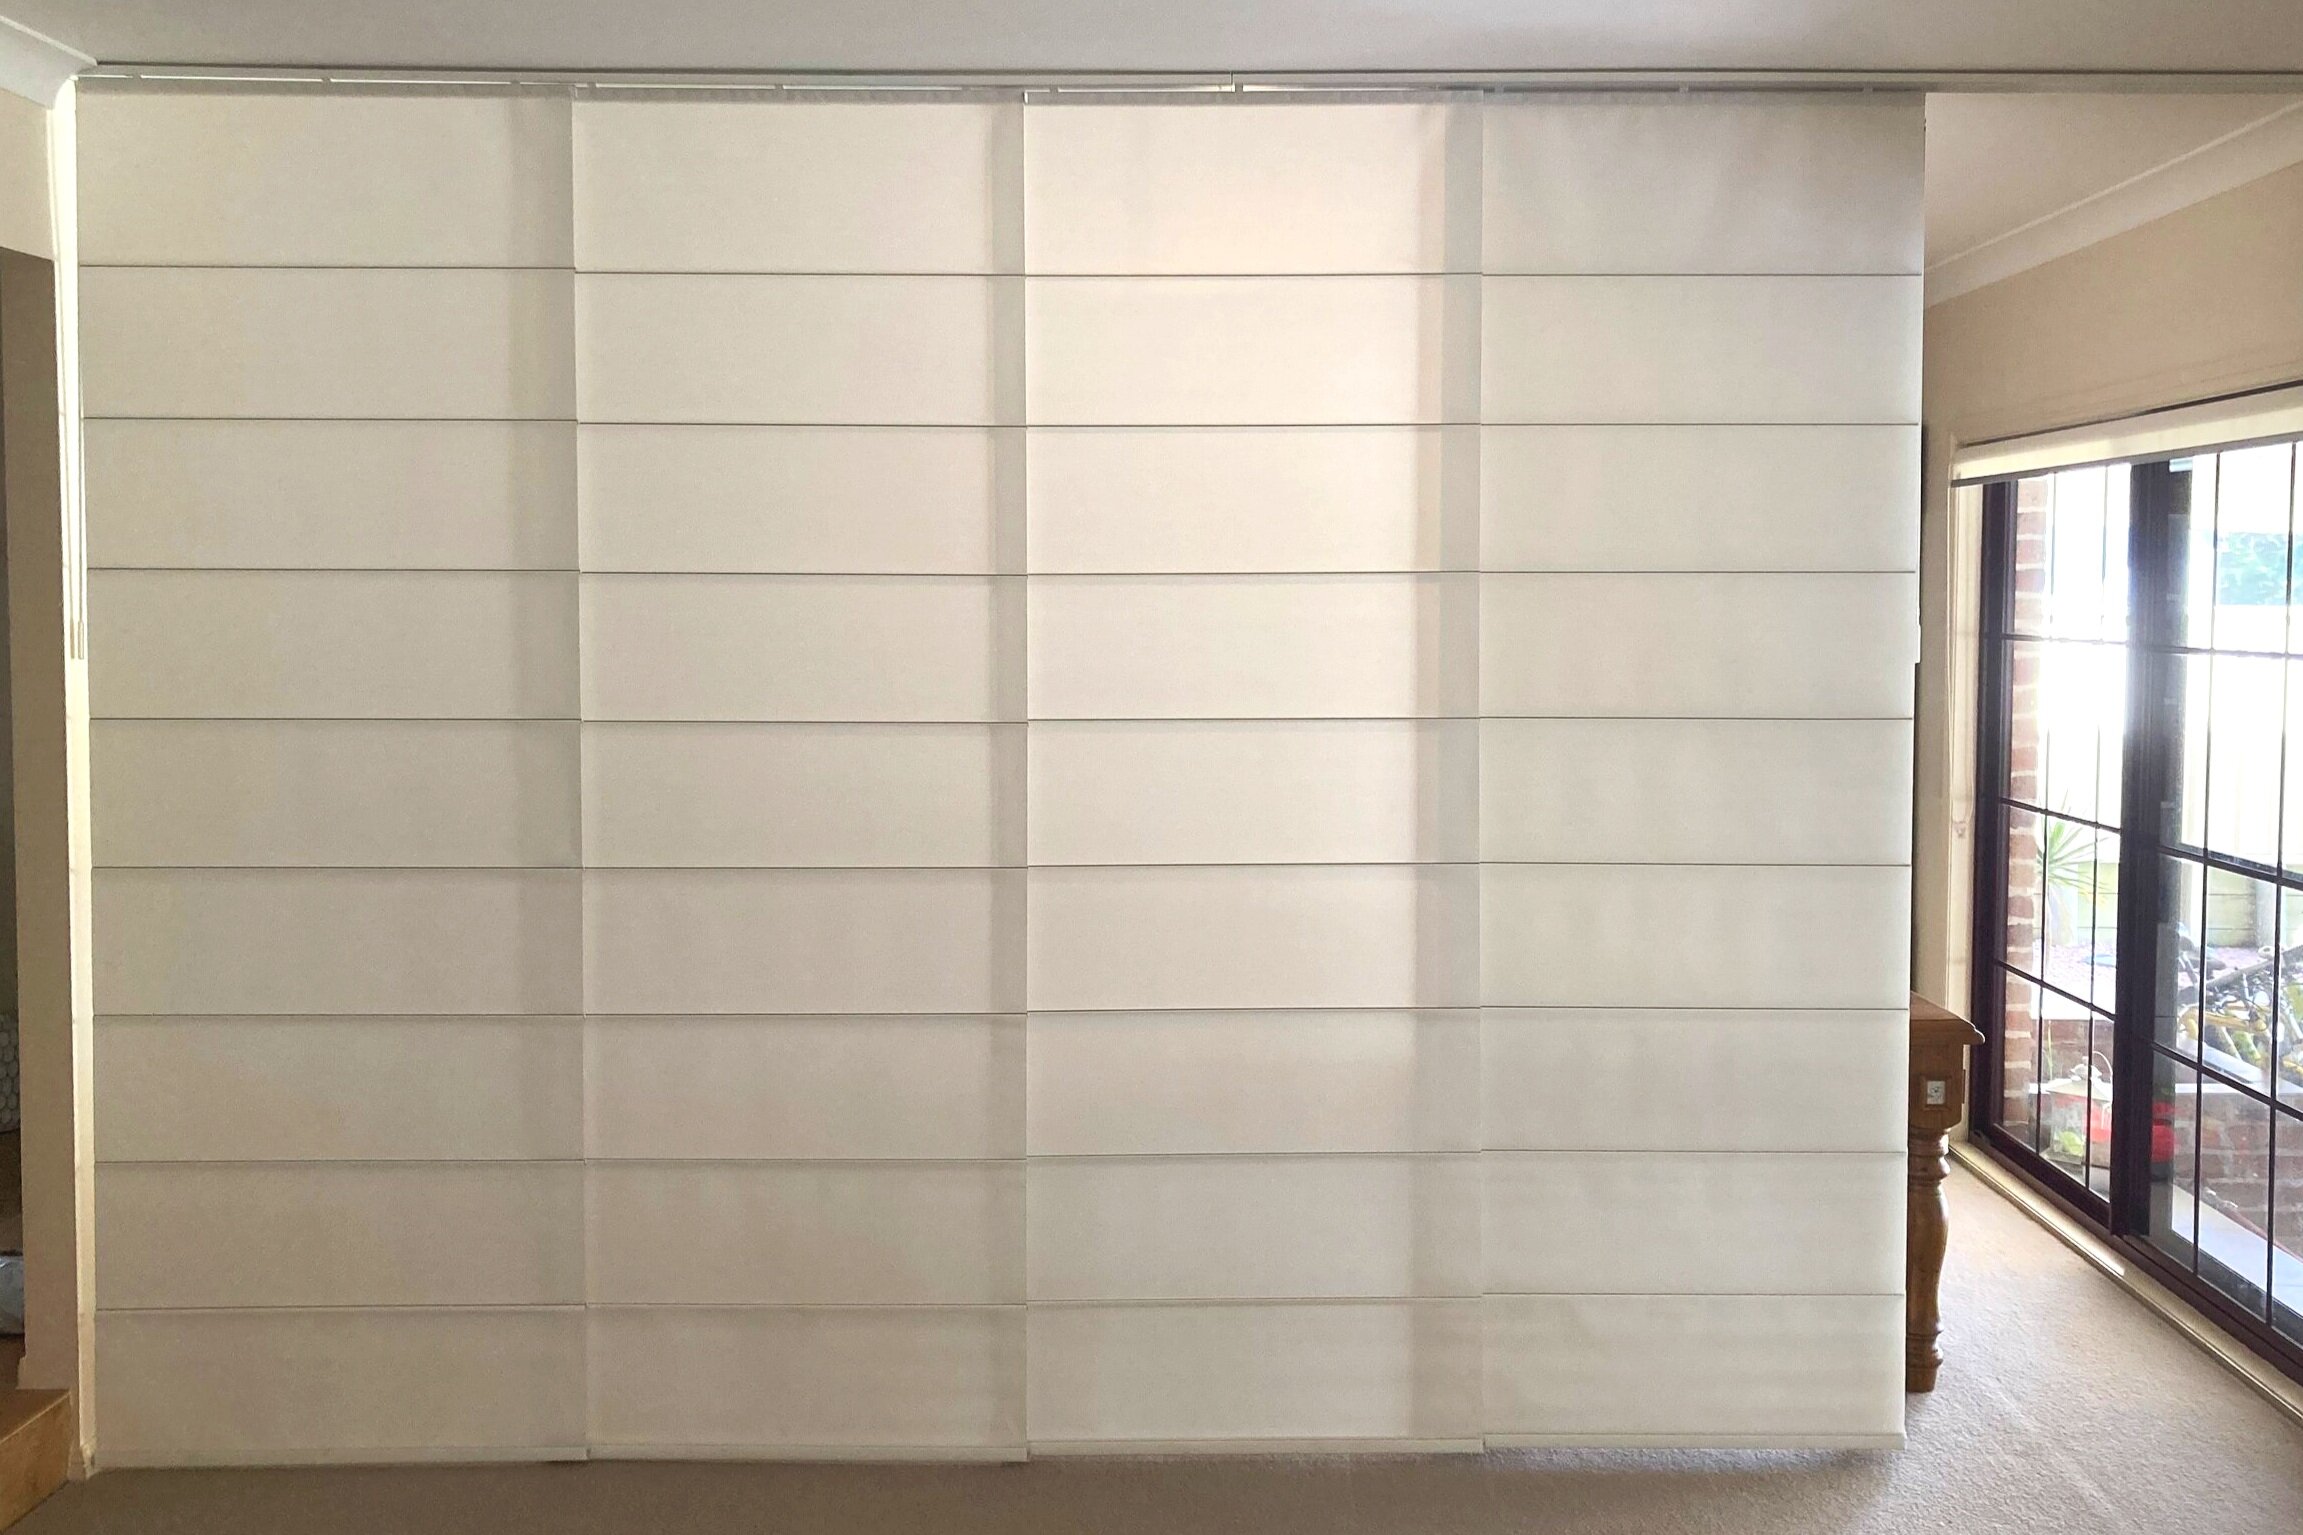 Panel Glide Blind - one panel open RHS